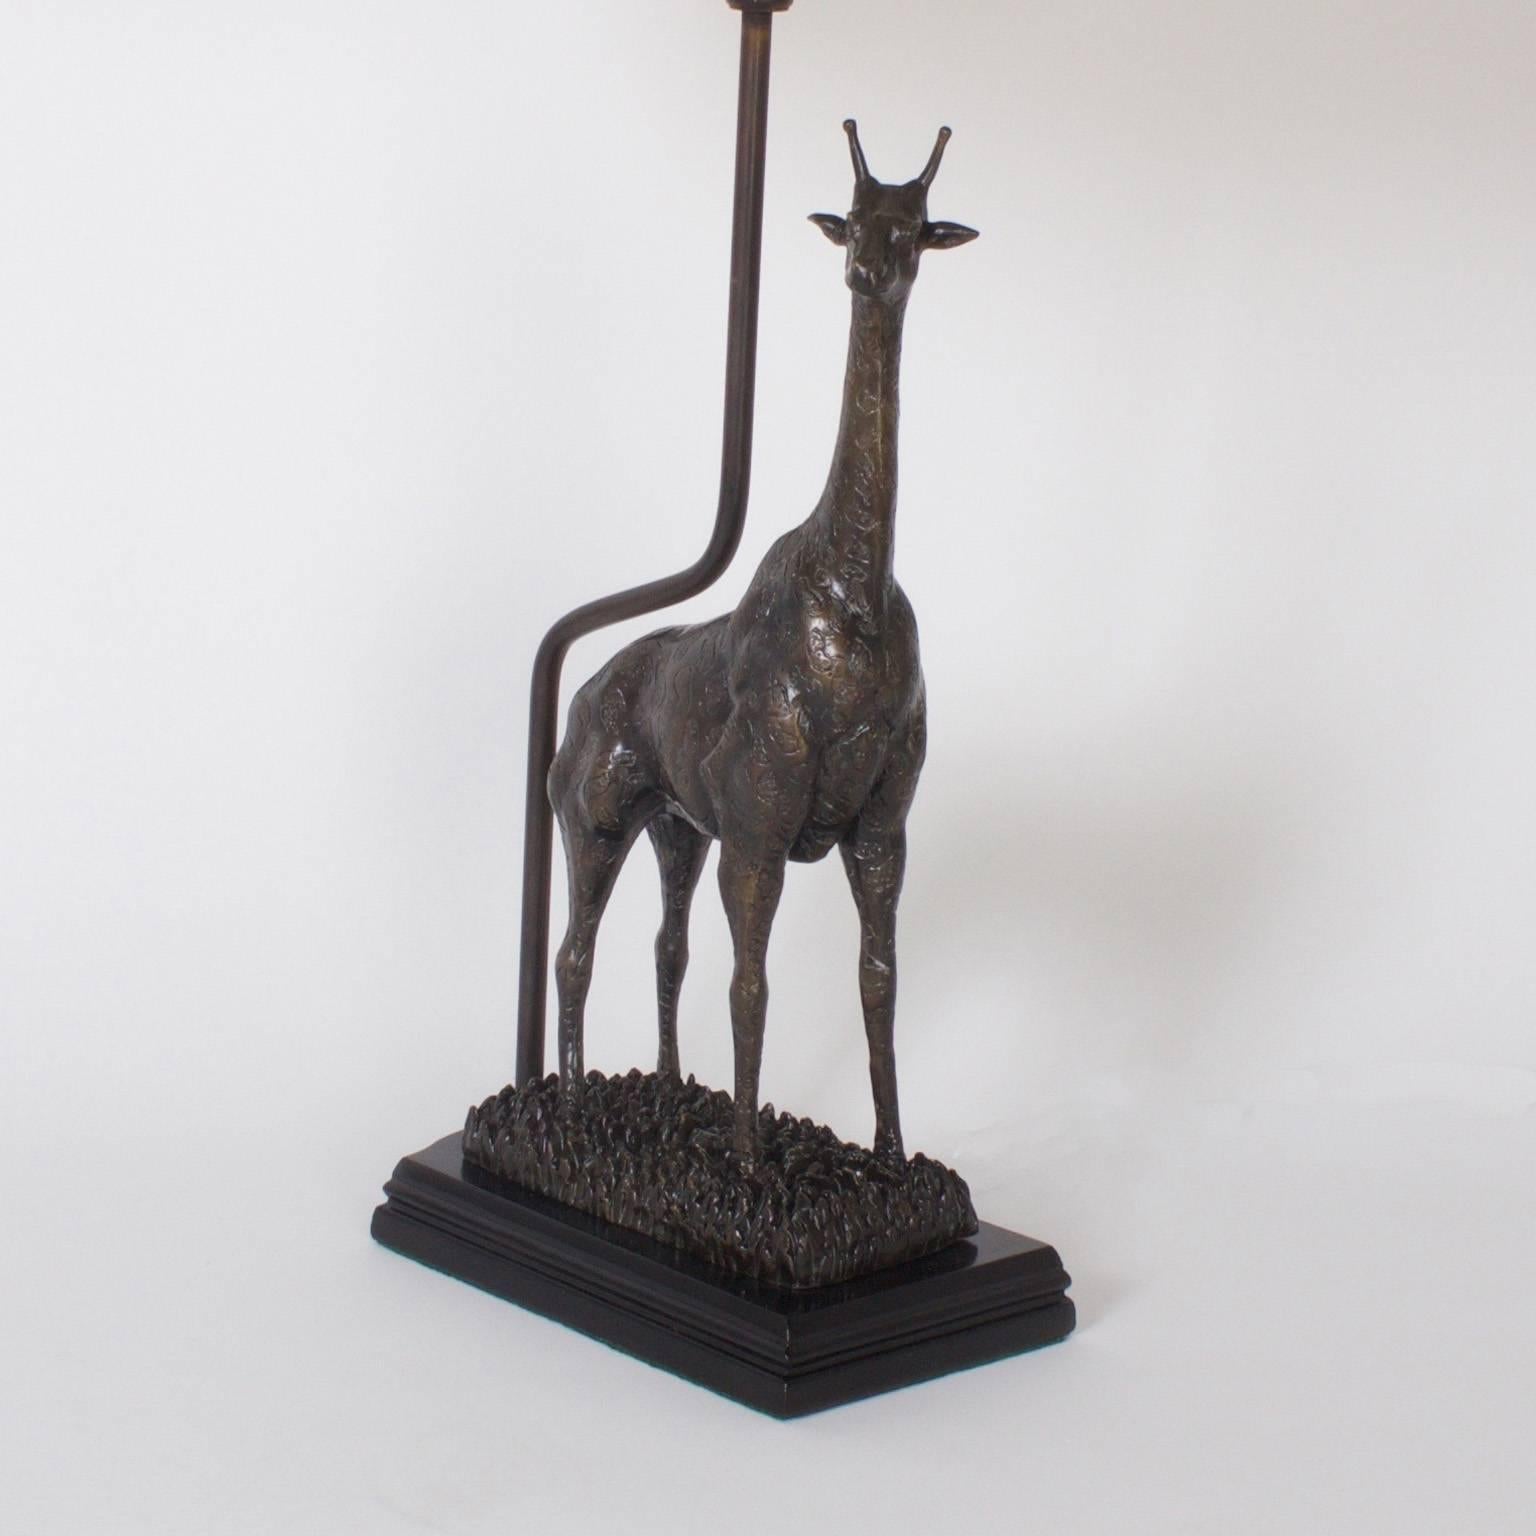 Handsome pair of giraffe table lamps depicting the power and grace of these curious animals. Crafted in the Mid-Century with bronze and presented on ebonized bases. These lamps cross over many style and time lines with aplomb.
Newly wired.